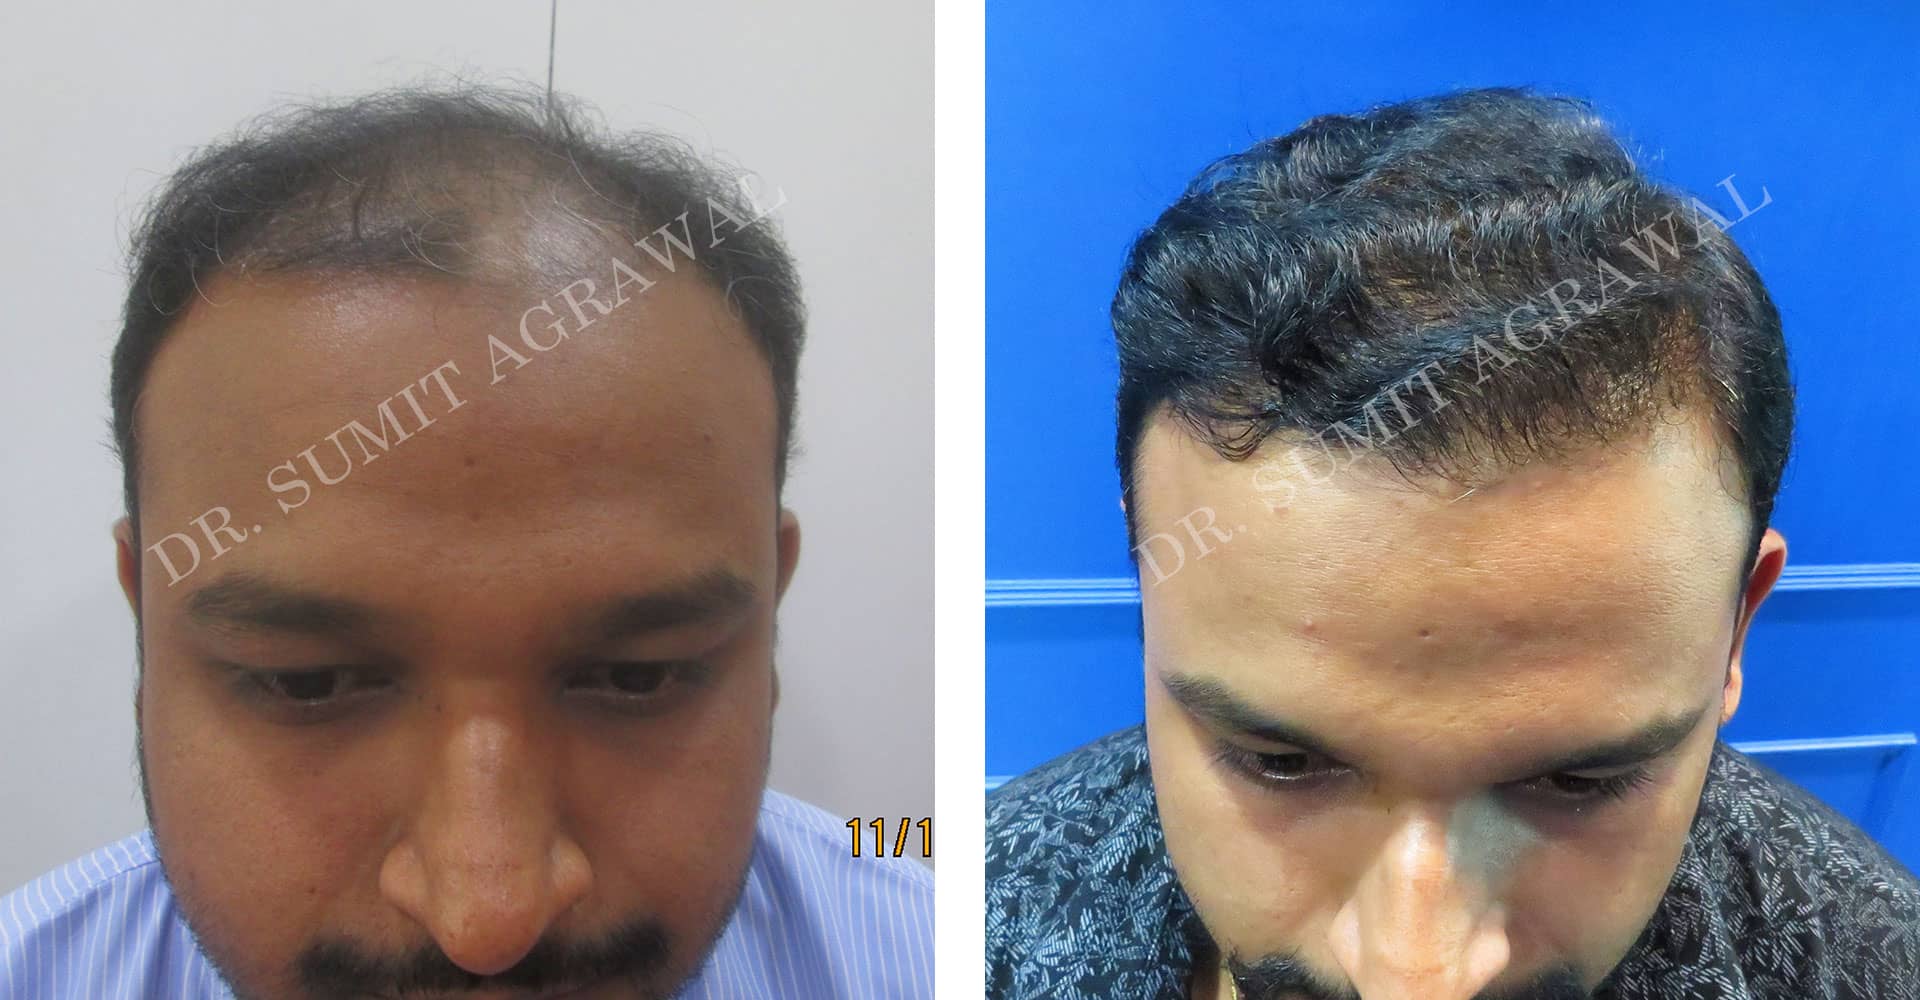 Hair Loss Treatment: Hair Transplant or Microneedling with PRP?